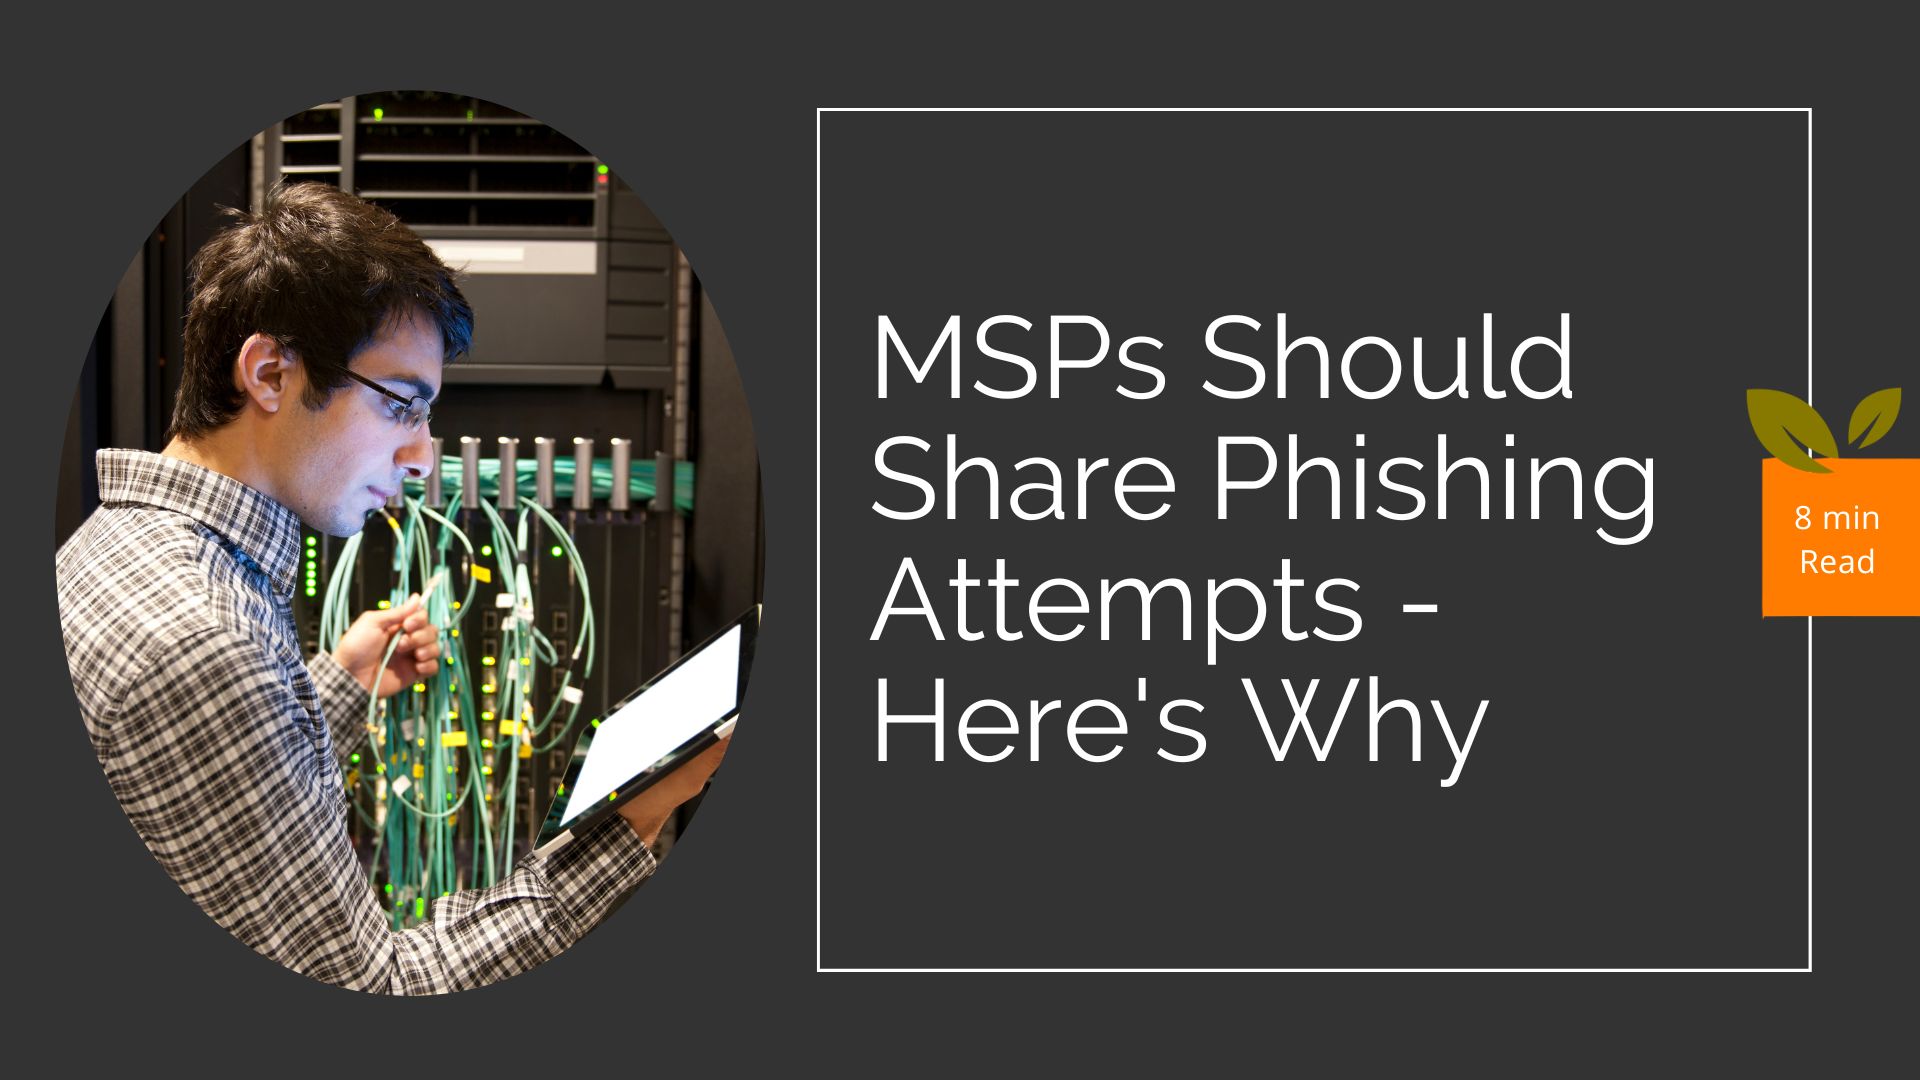 MSP Industry Should Share Phishing - Here's Why